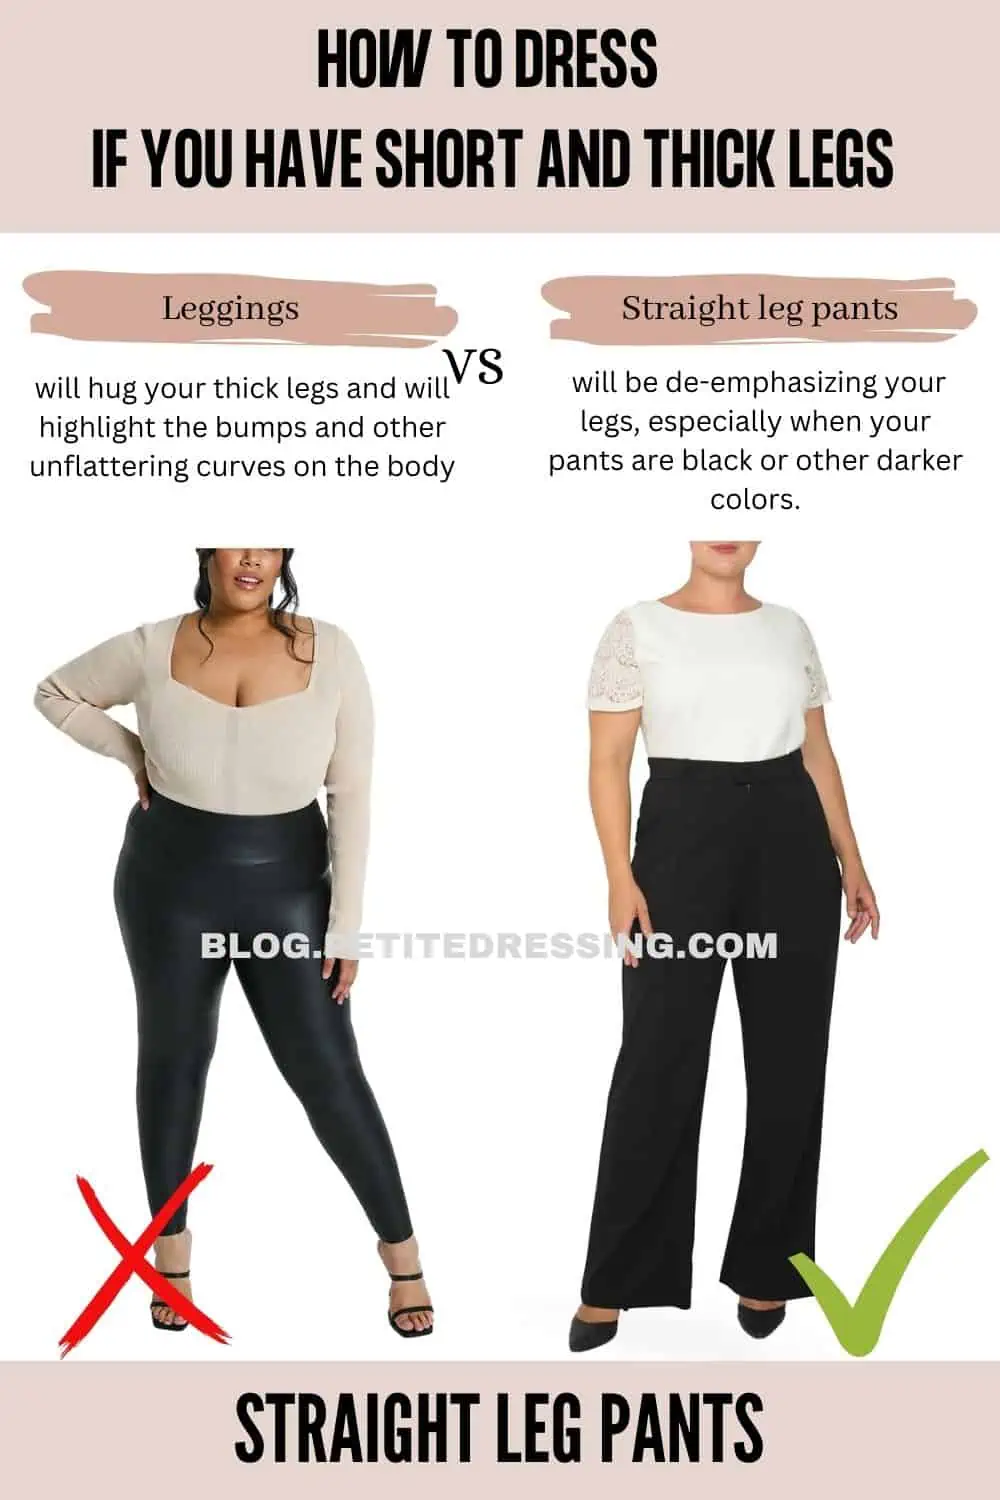 I'm 5'2″, and this is what to wear or avoid if you have short and